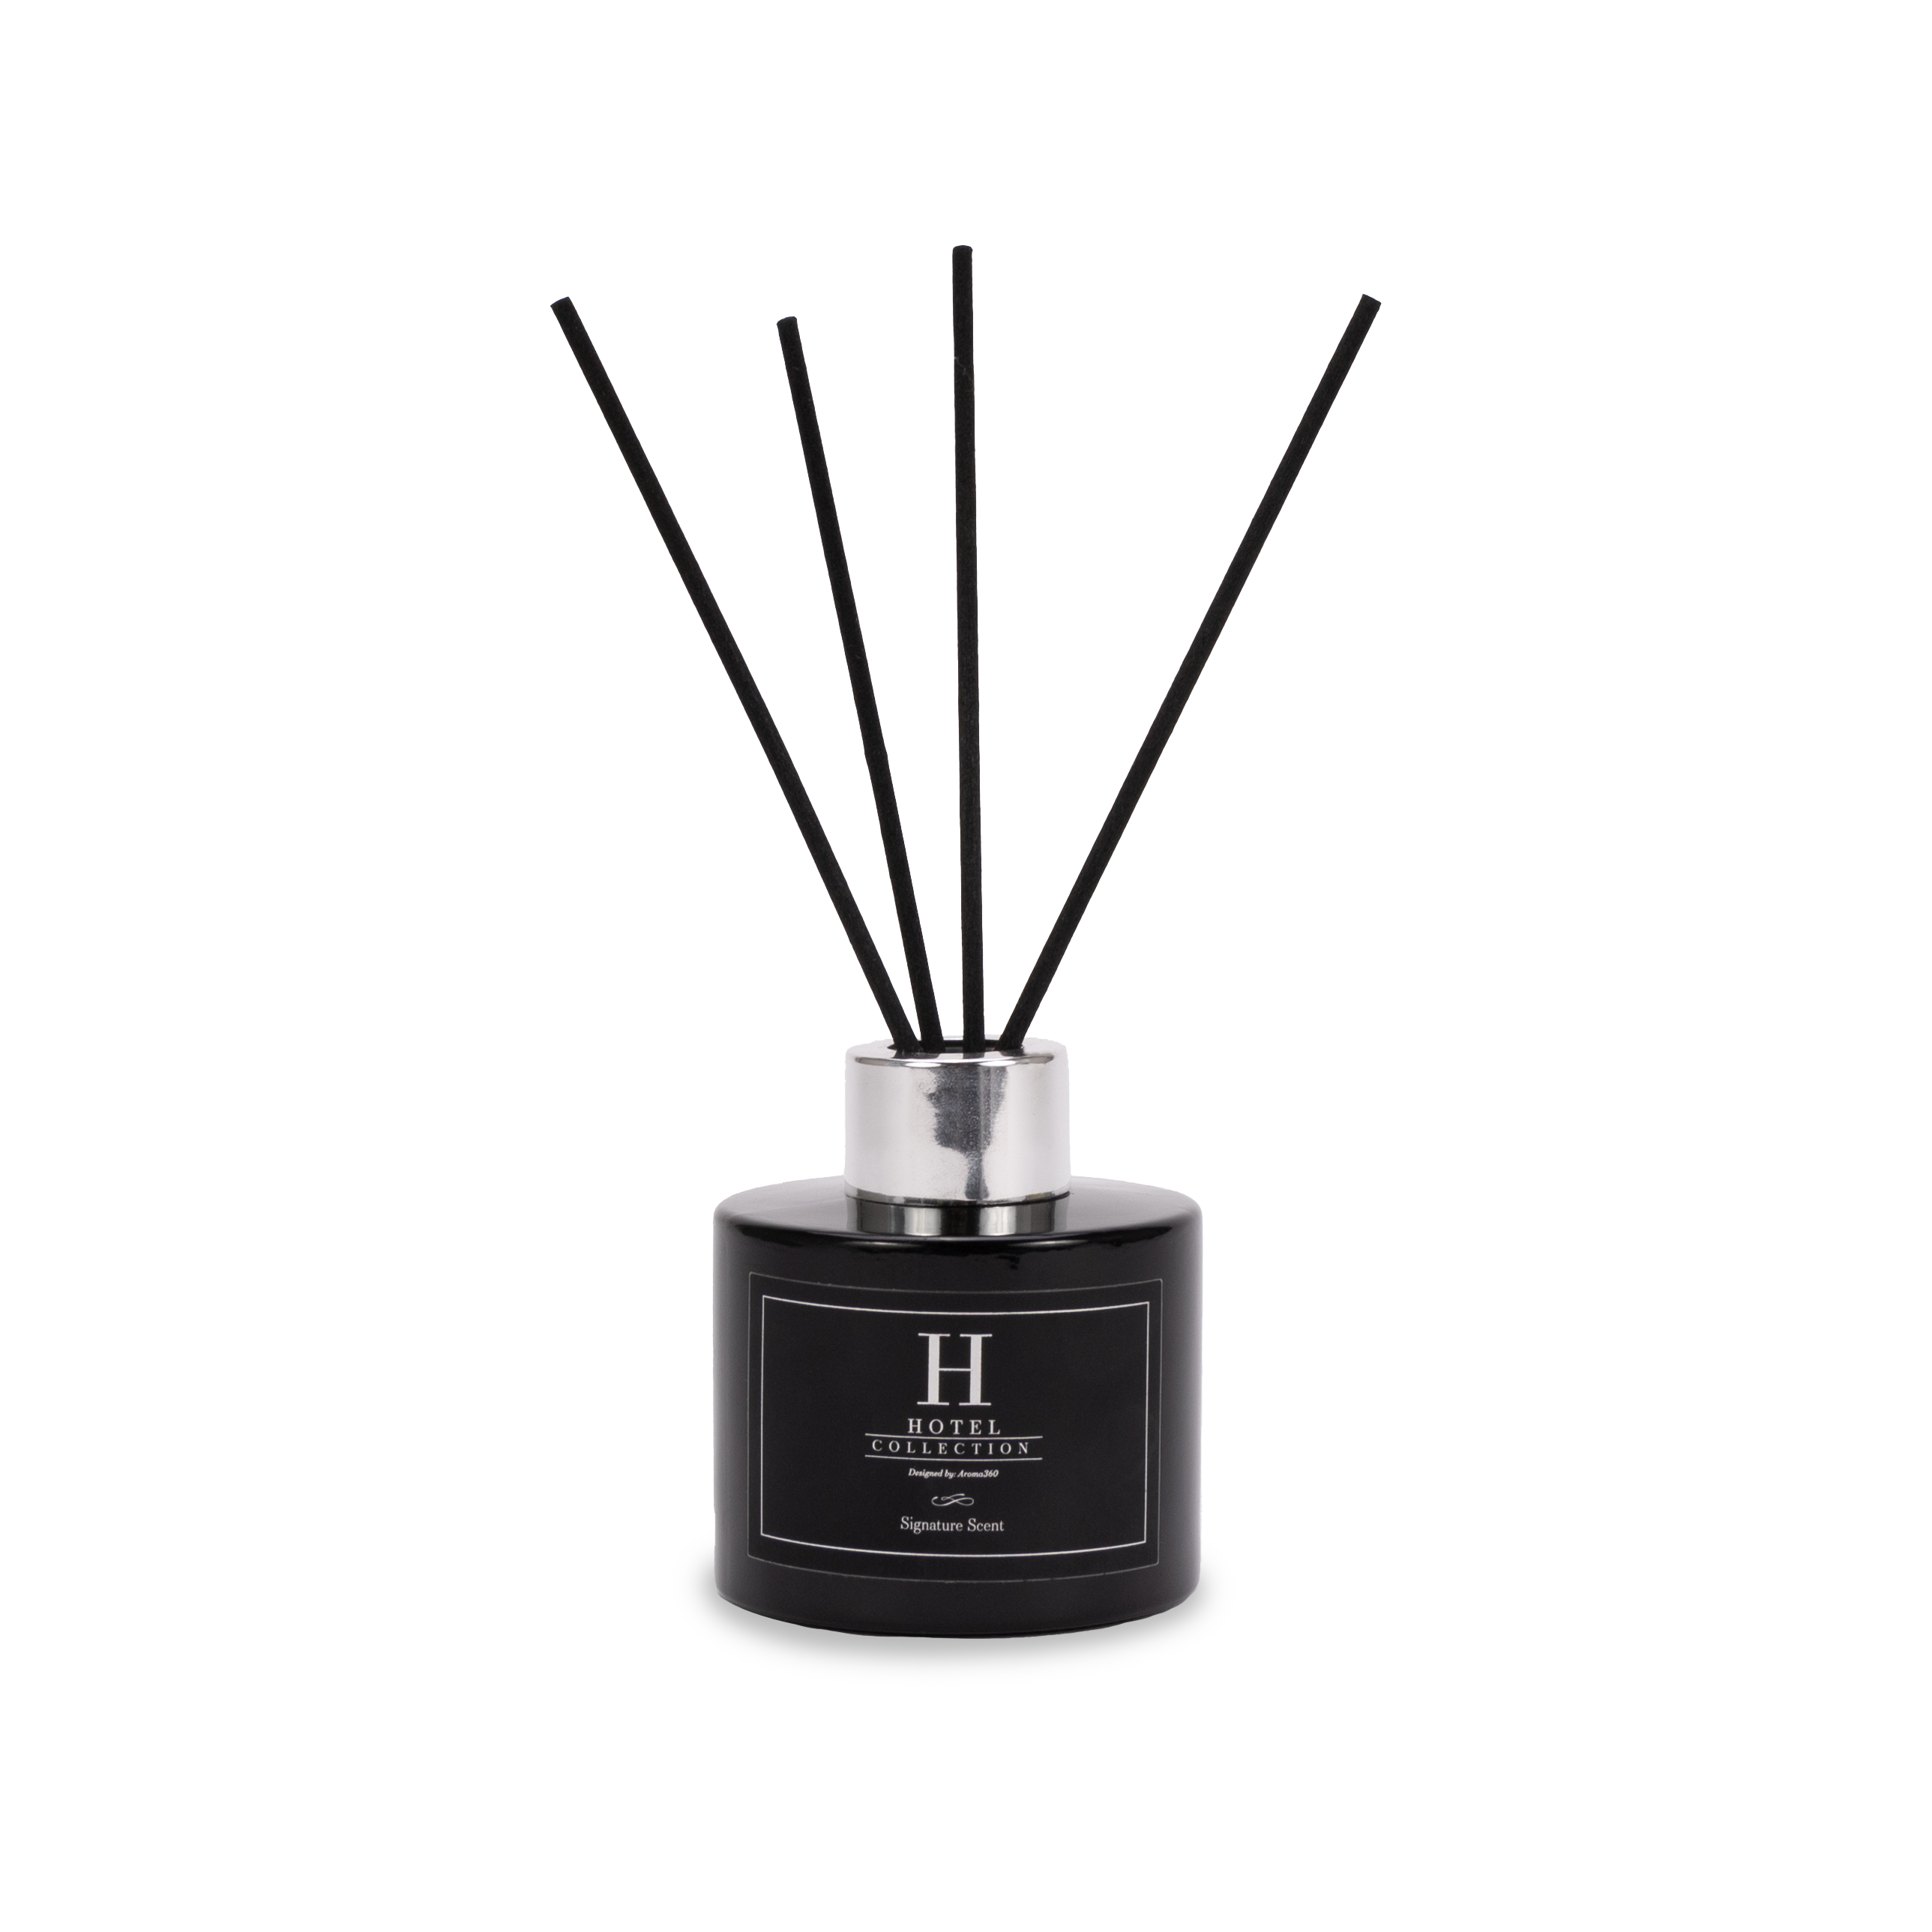 Scentimental Scents 4 oz. Caribbean Reed Diffuser Oil by Scentimental  Scents